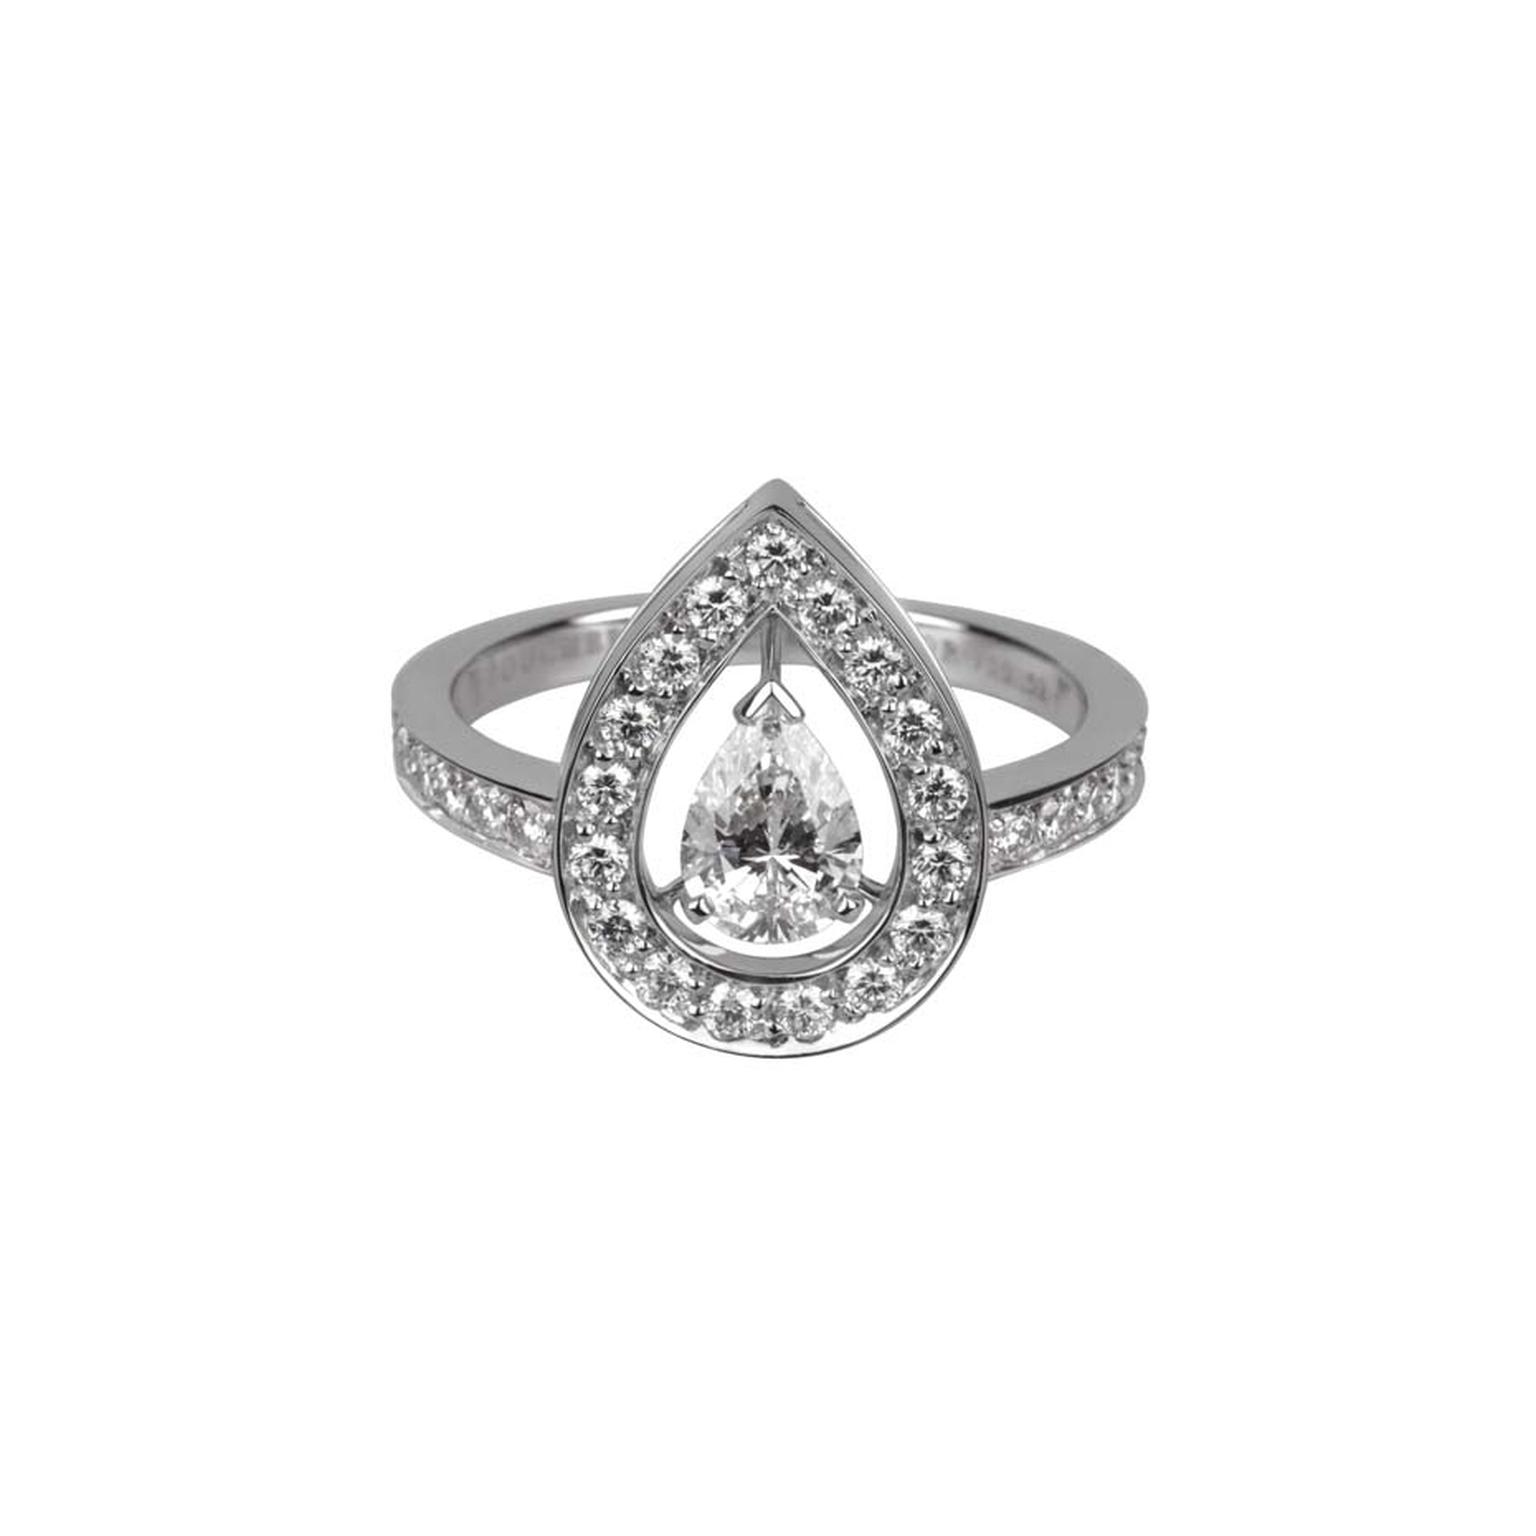 Boucheron Ava white gold engagement ring features a central pear-cut diamond that appears to float in mid-air amidst thirty-five round diamonds.